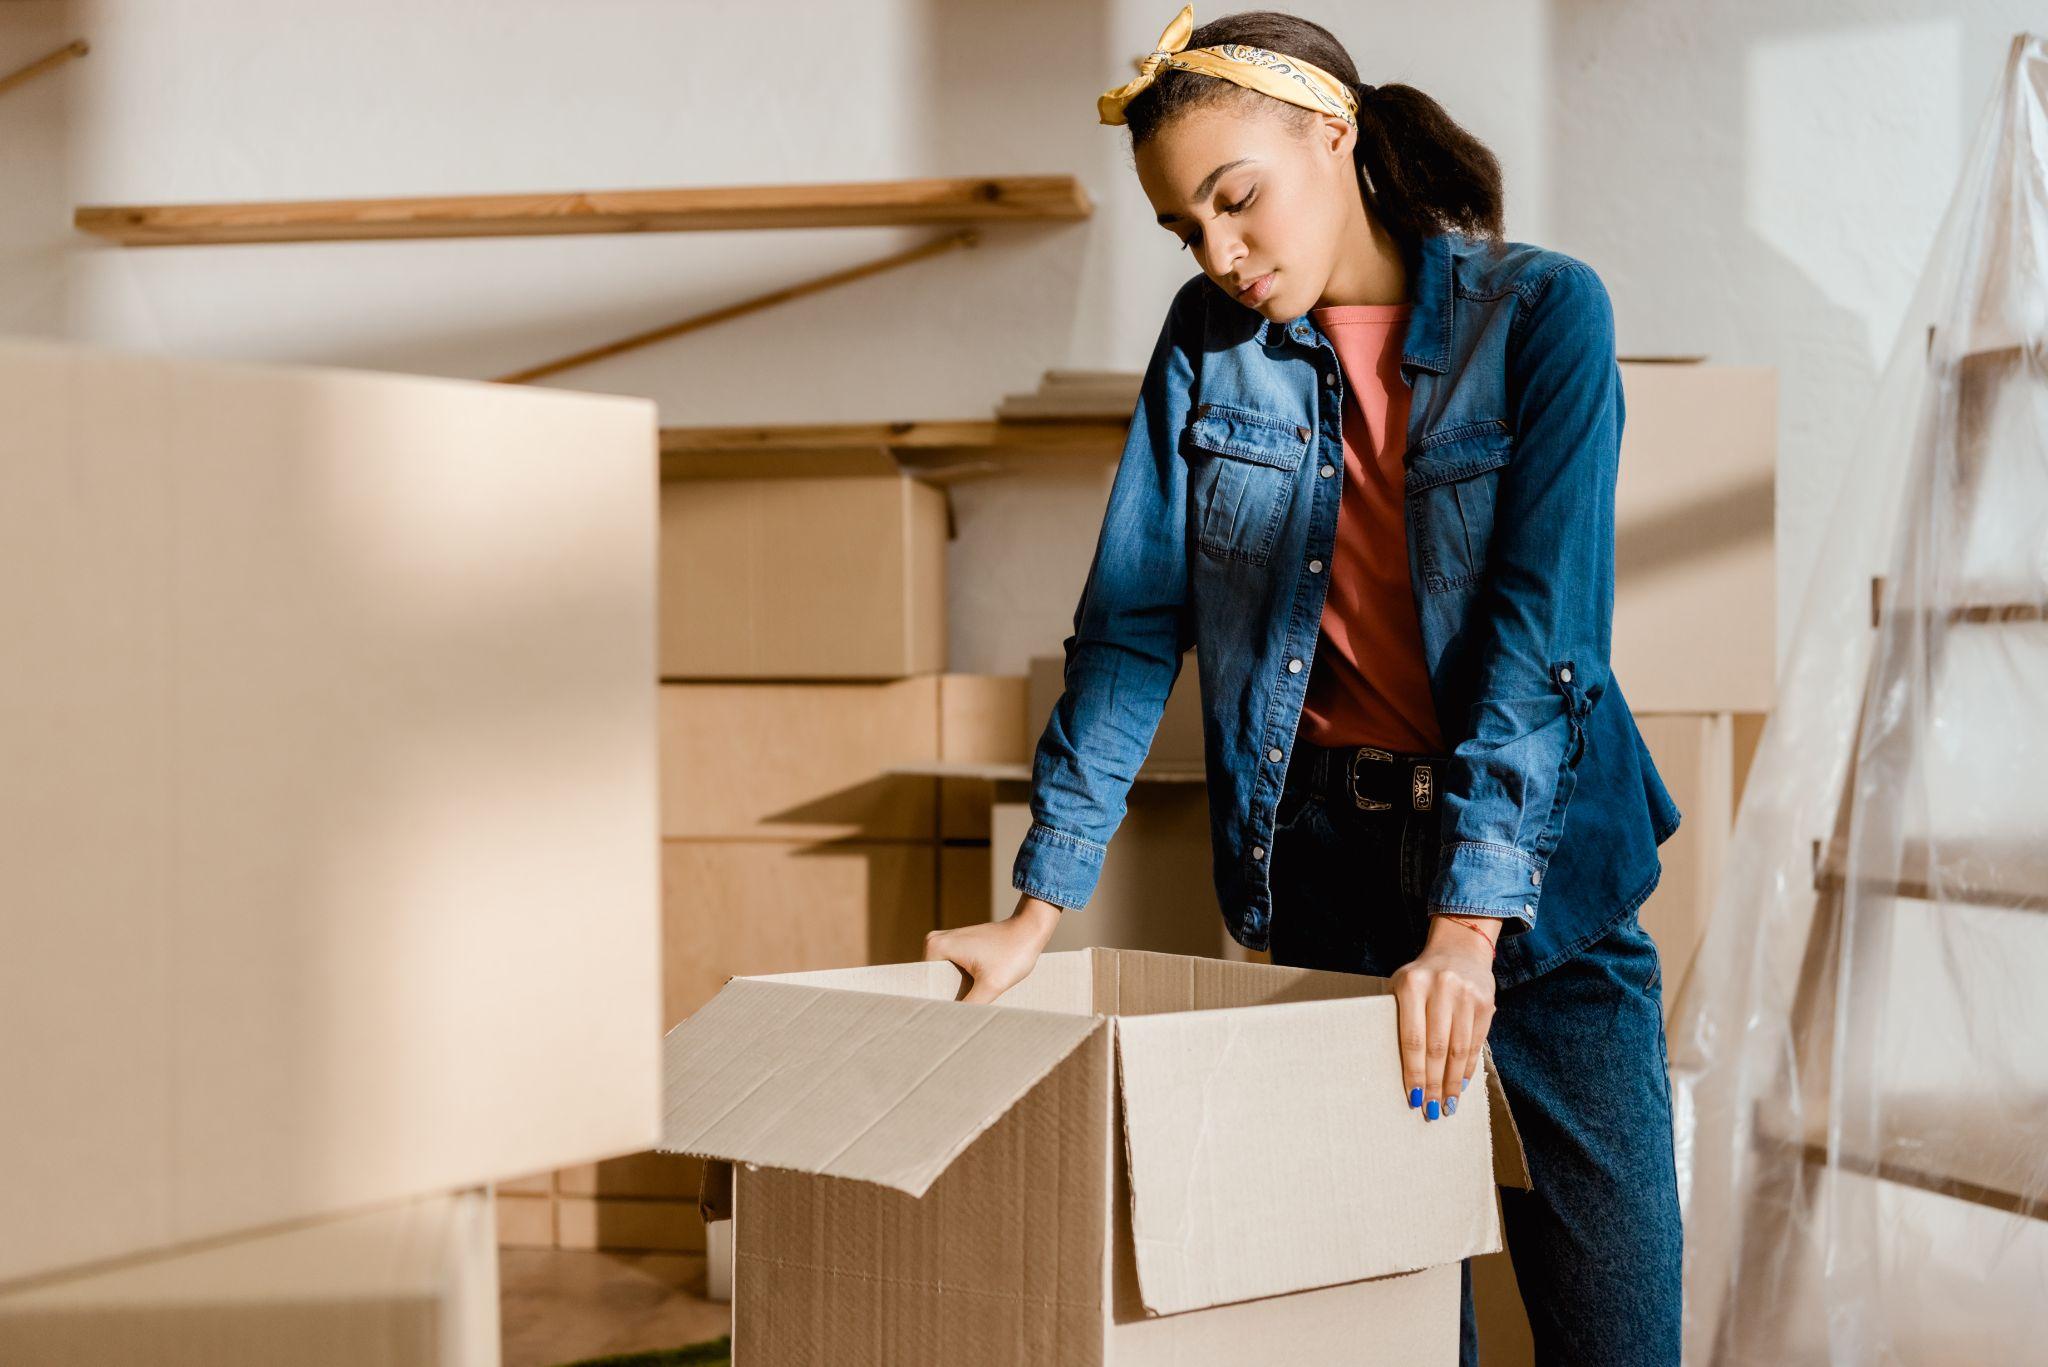 Upset girl unpacking cardboard boxes in new apartment